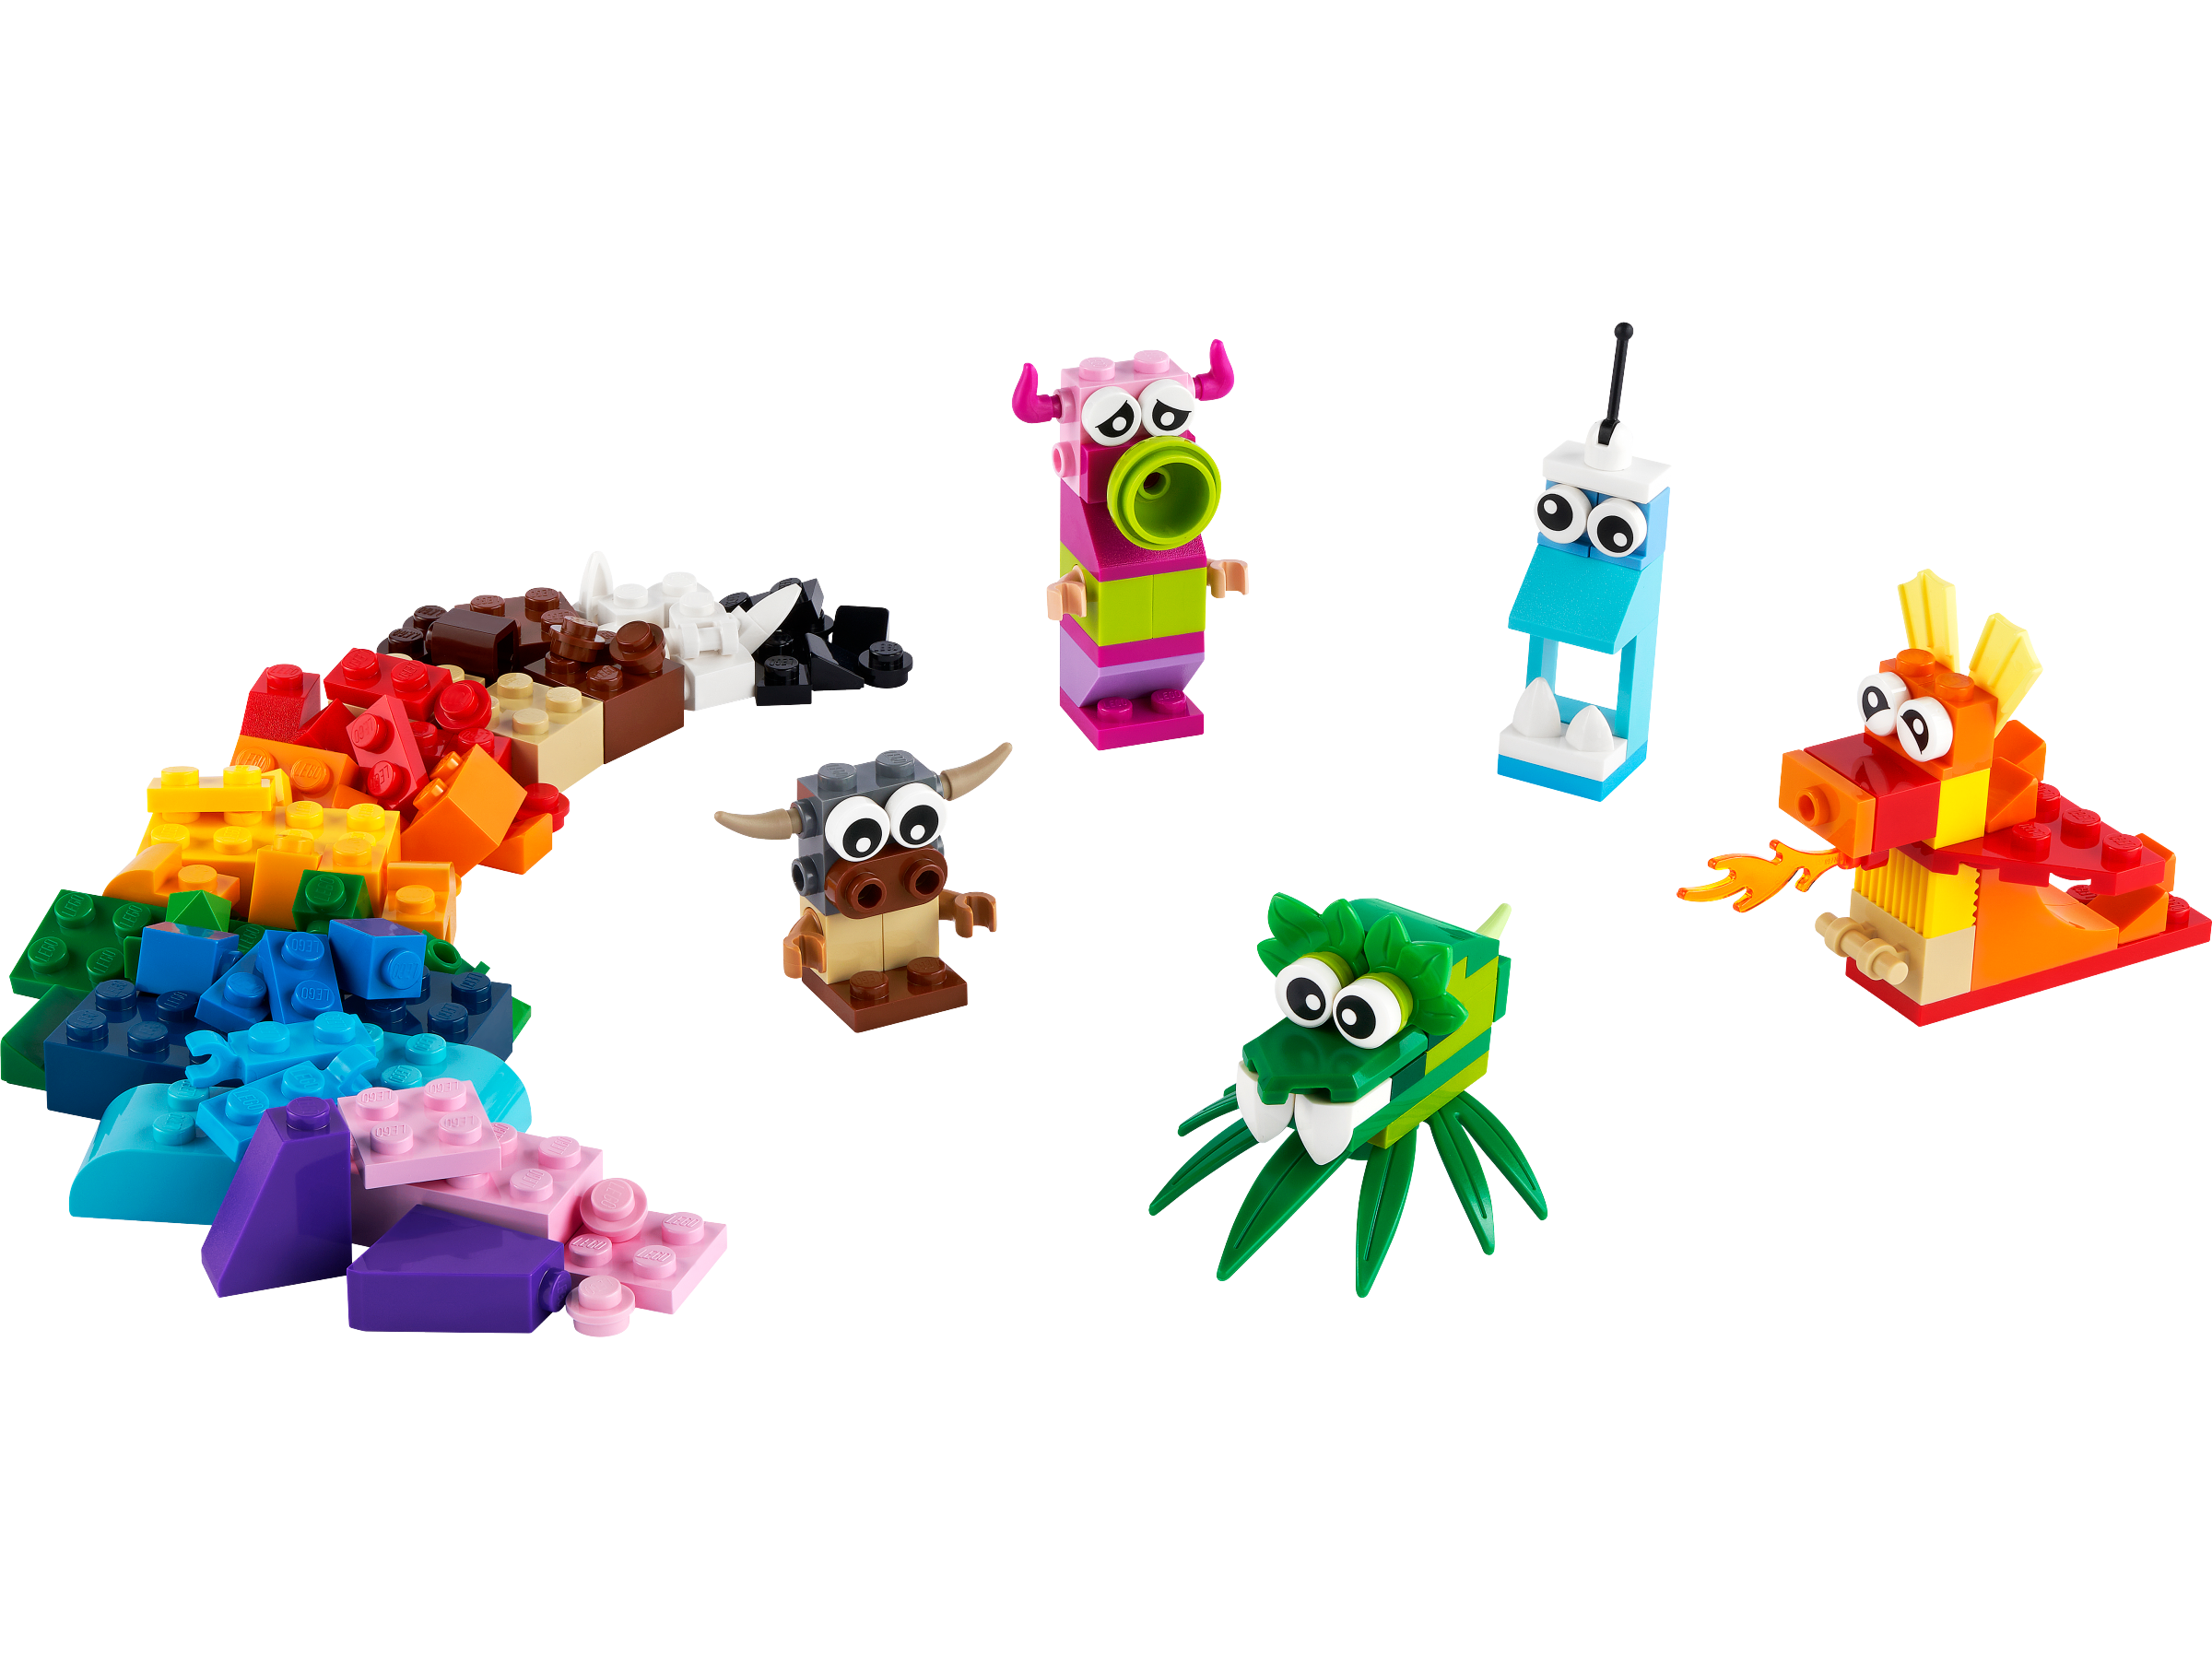 Rainbow Friends Monster Model Building Toys Set Kids Gifts for